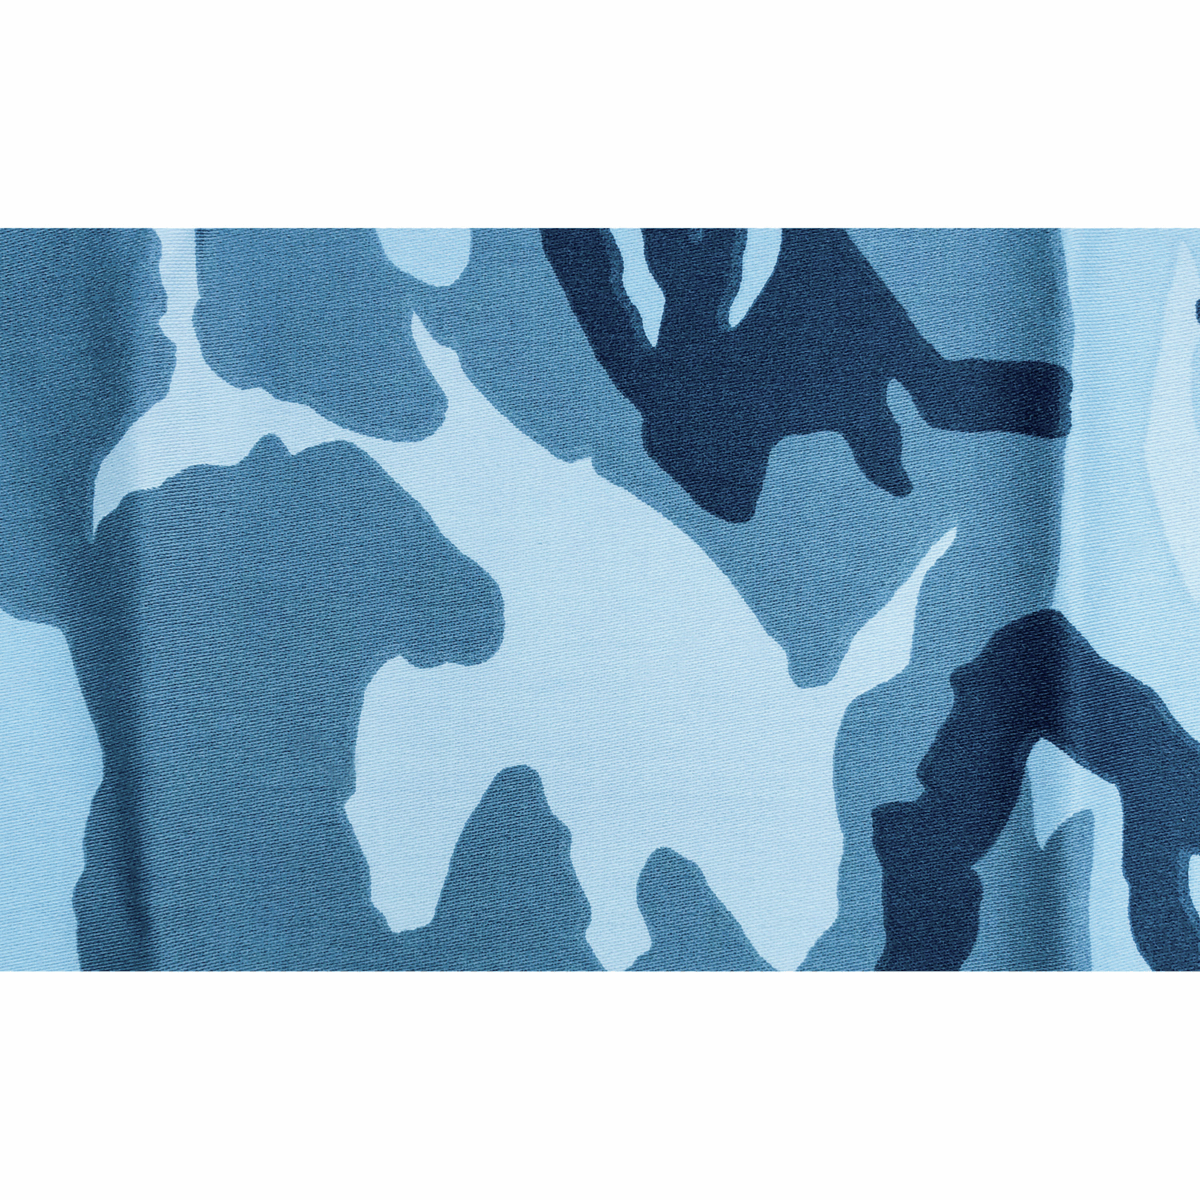 Marbet Blue Camouflage Iron-on Mending Fabric - 40 x 15cm